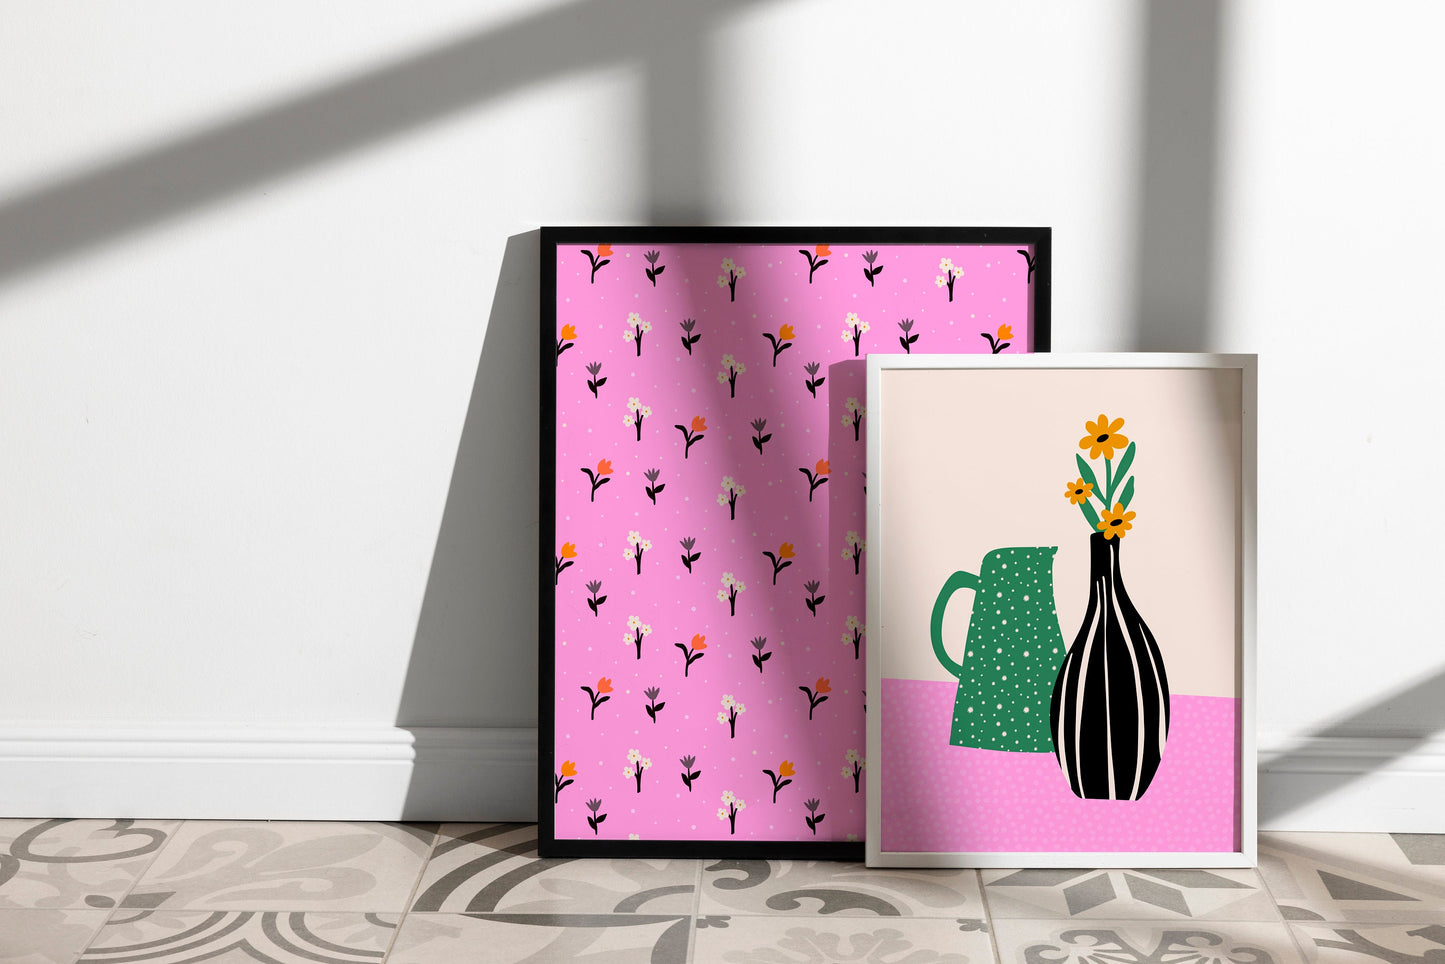 Quirky Vases Print